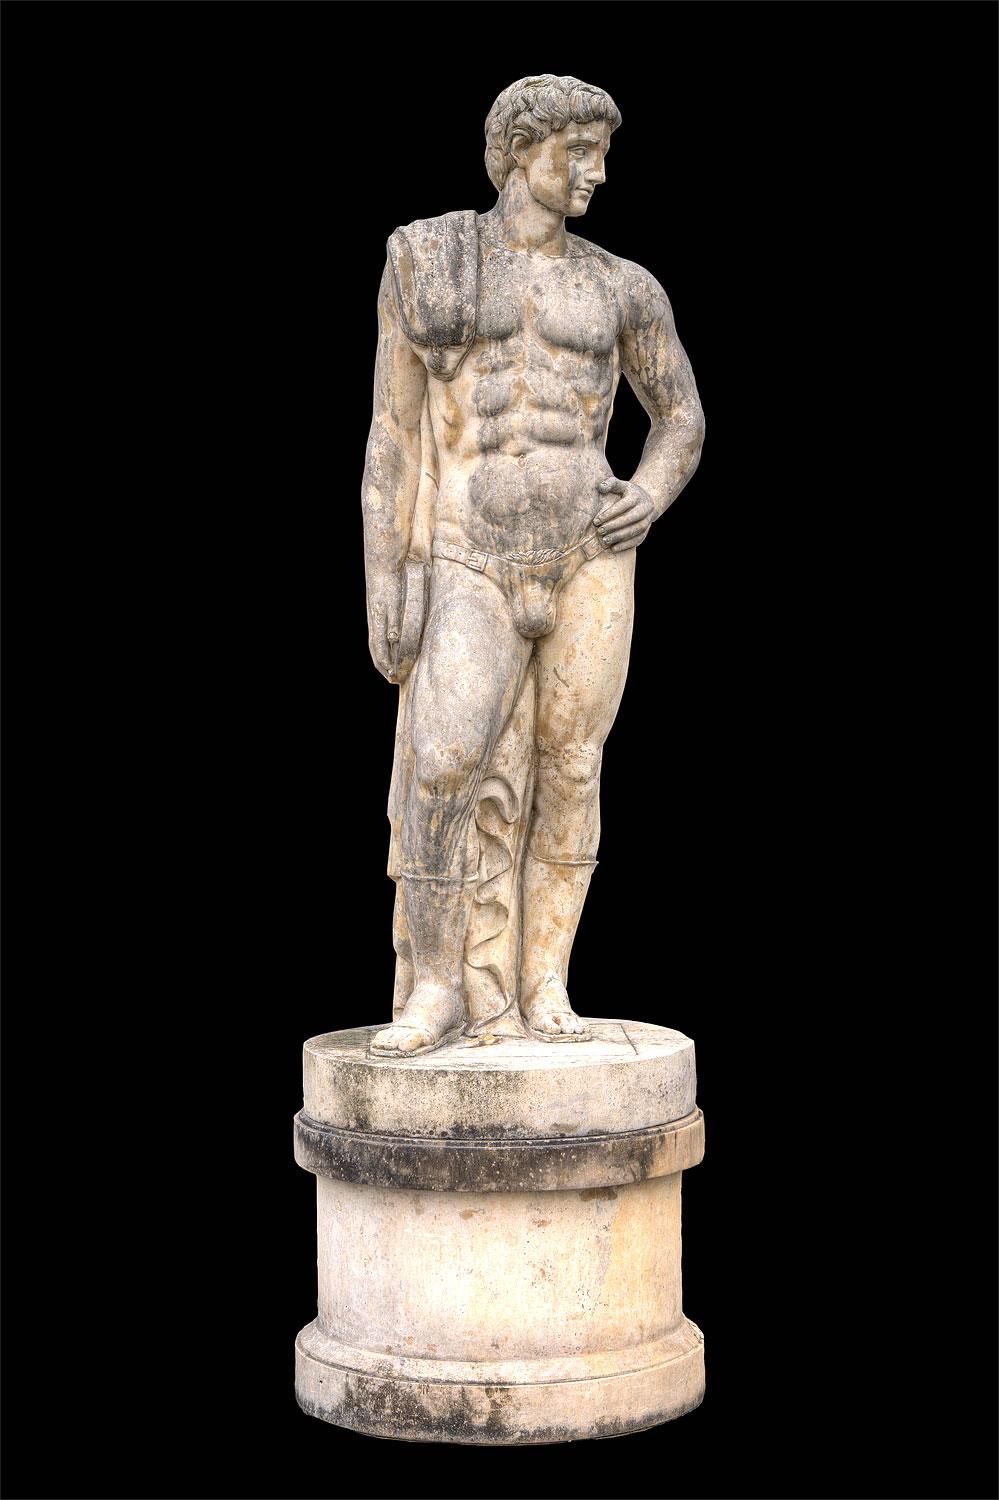  Monumental Italian Rationalist Marble Sculptures of Hercules and Discobolo For Sale 15